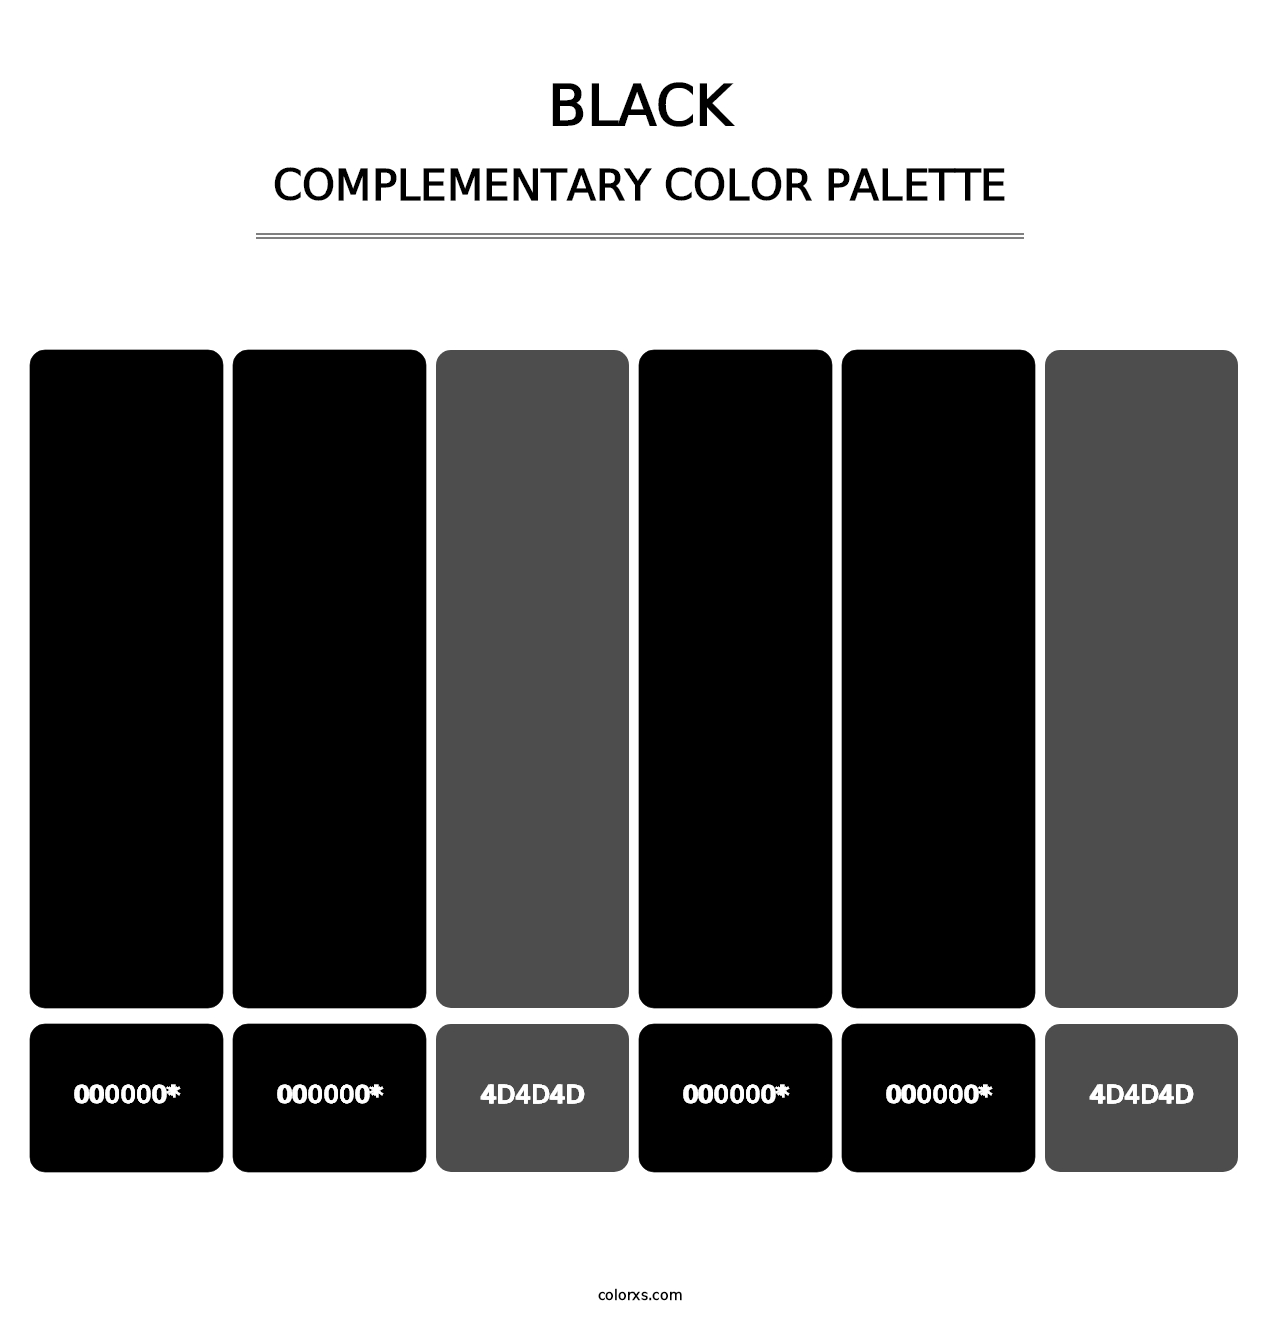 Black - Complementary Color Palette